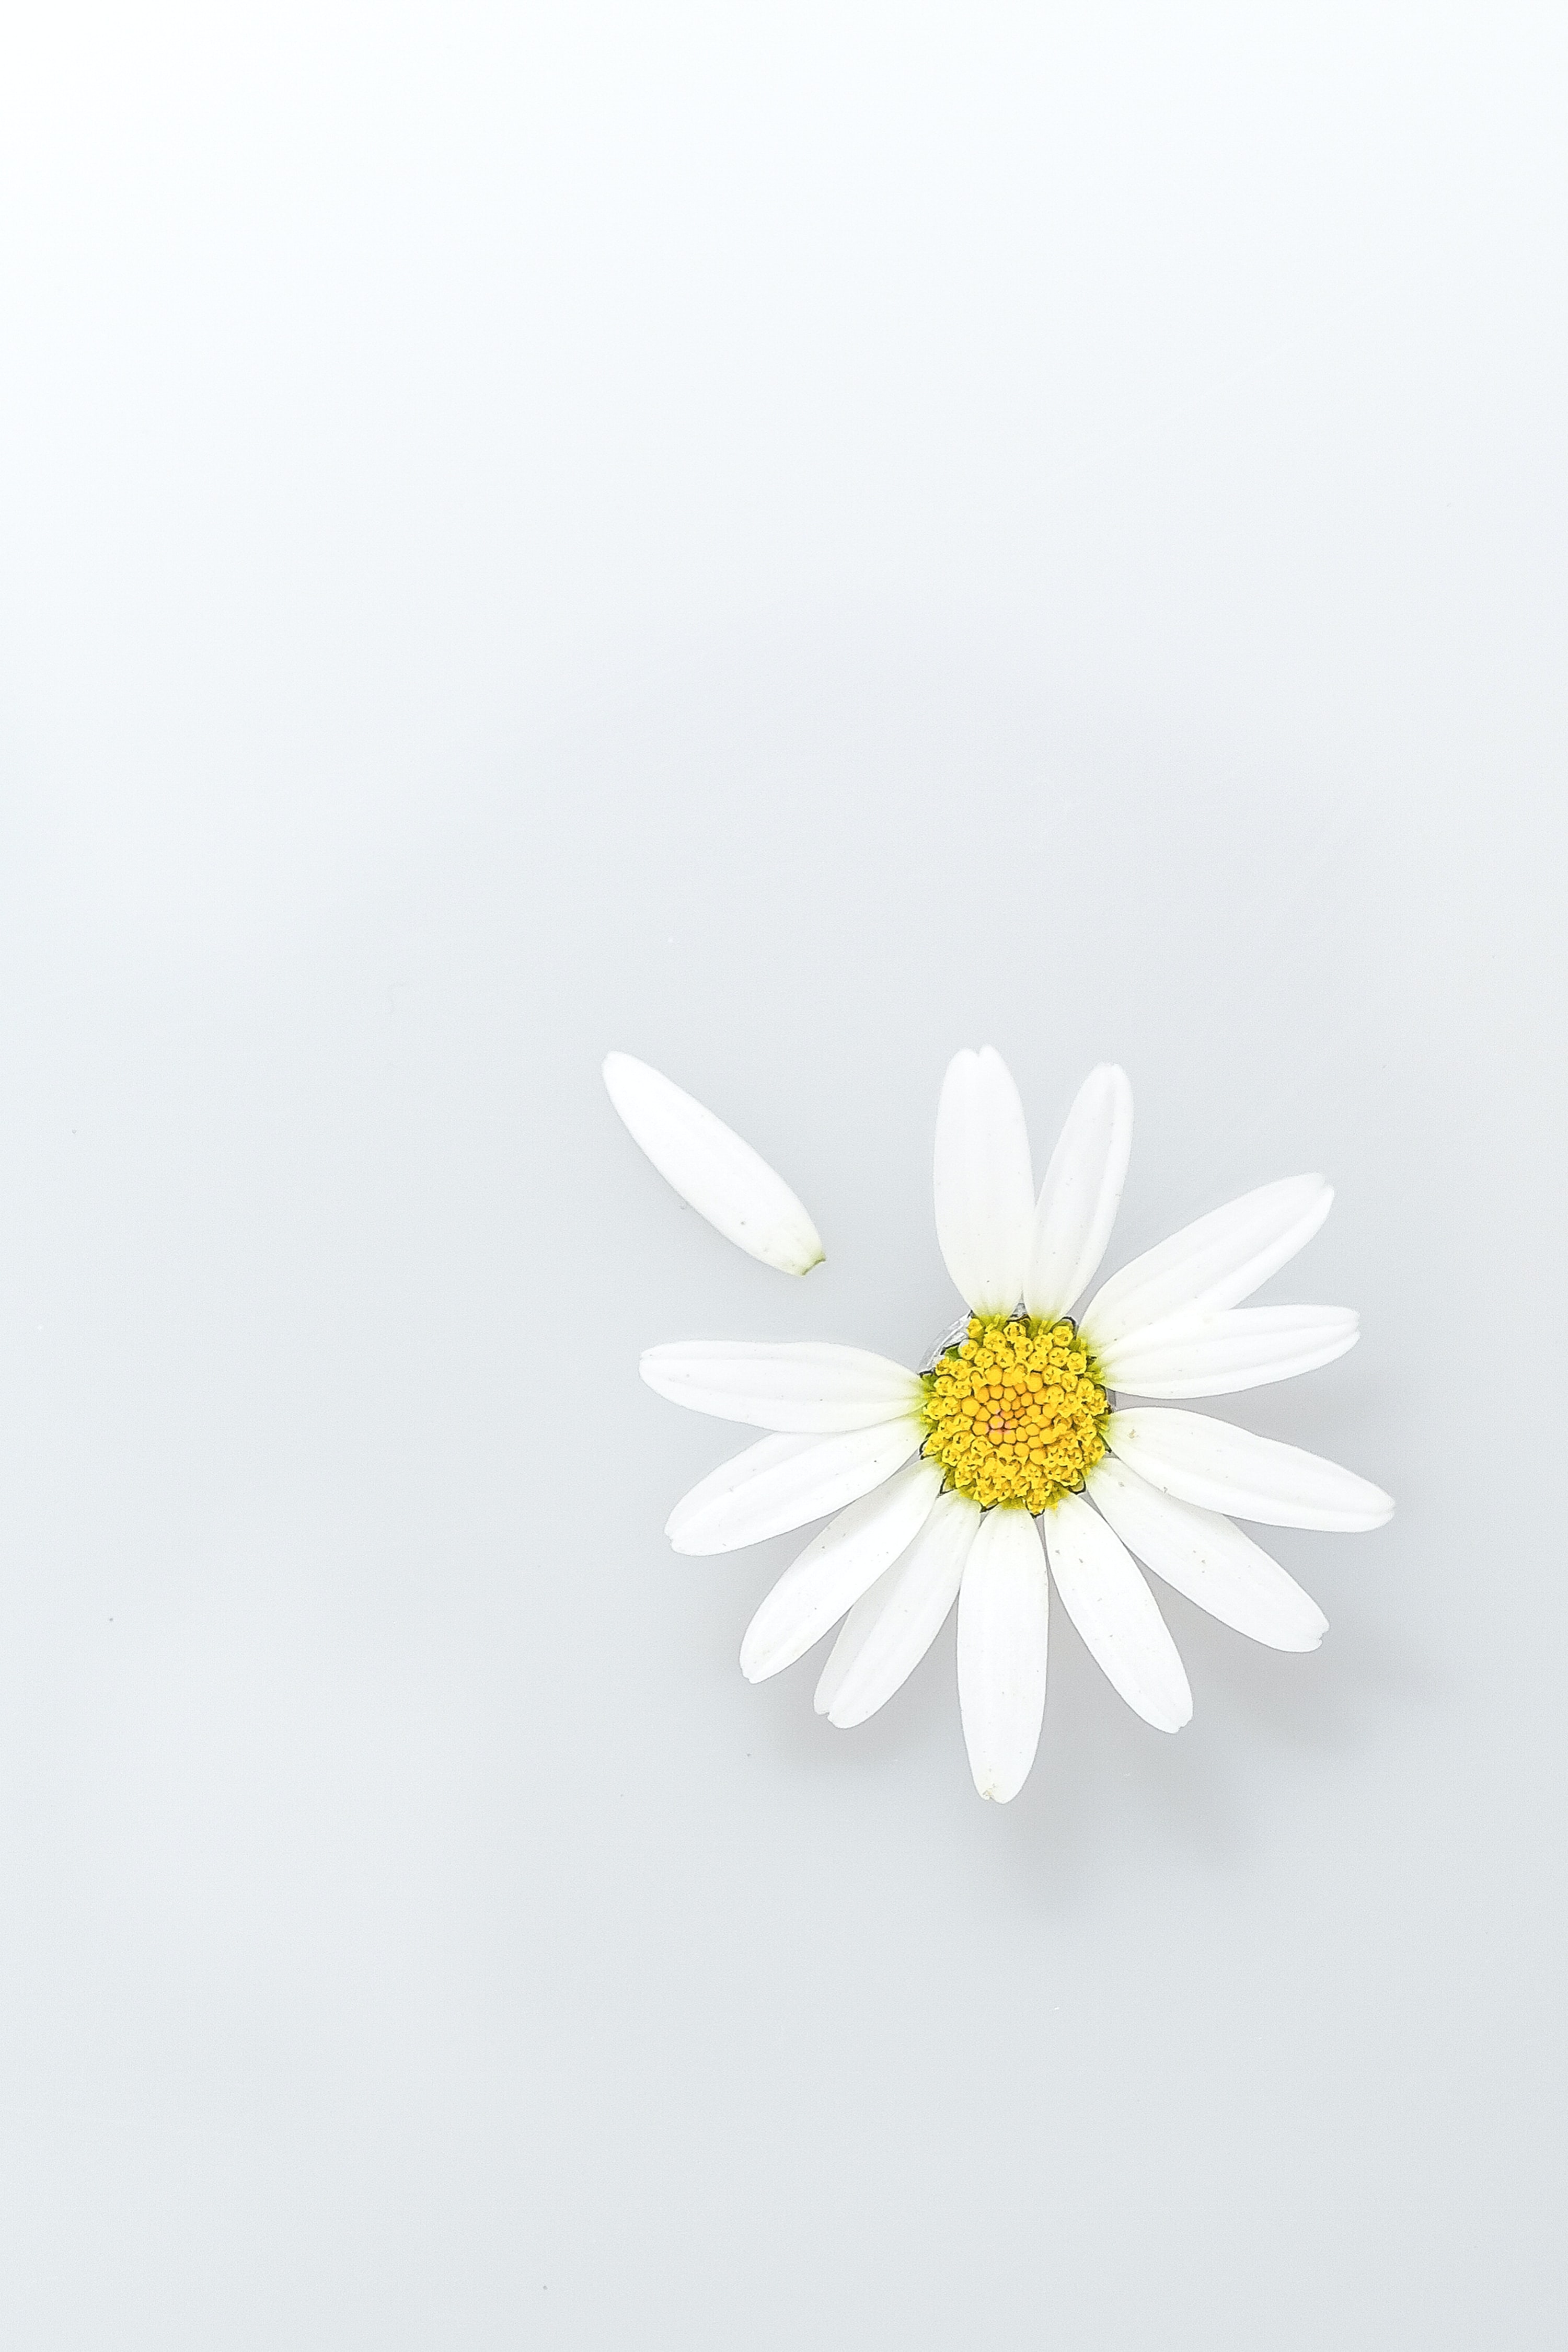 Wildflowers flowers, petals, chamomile, camomile 4k Wallpaper